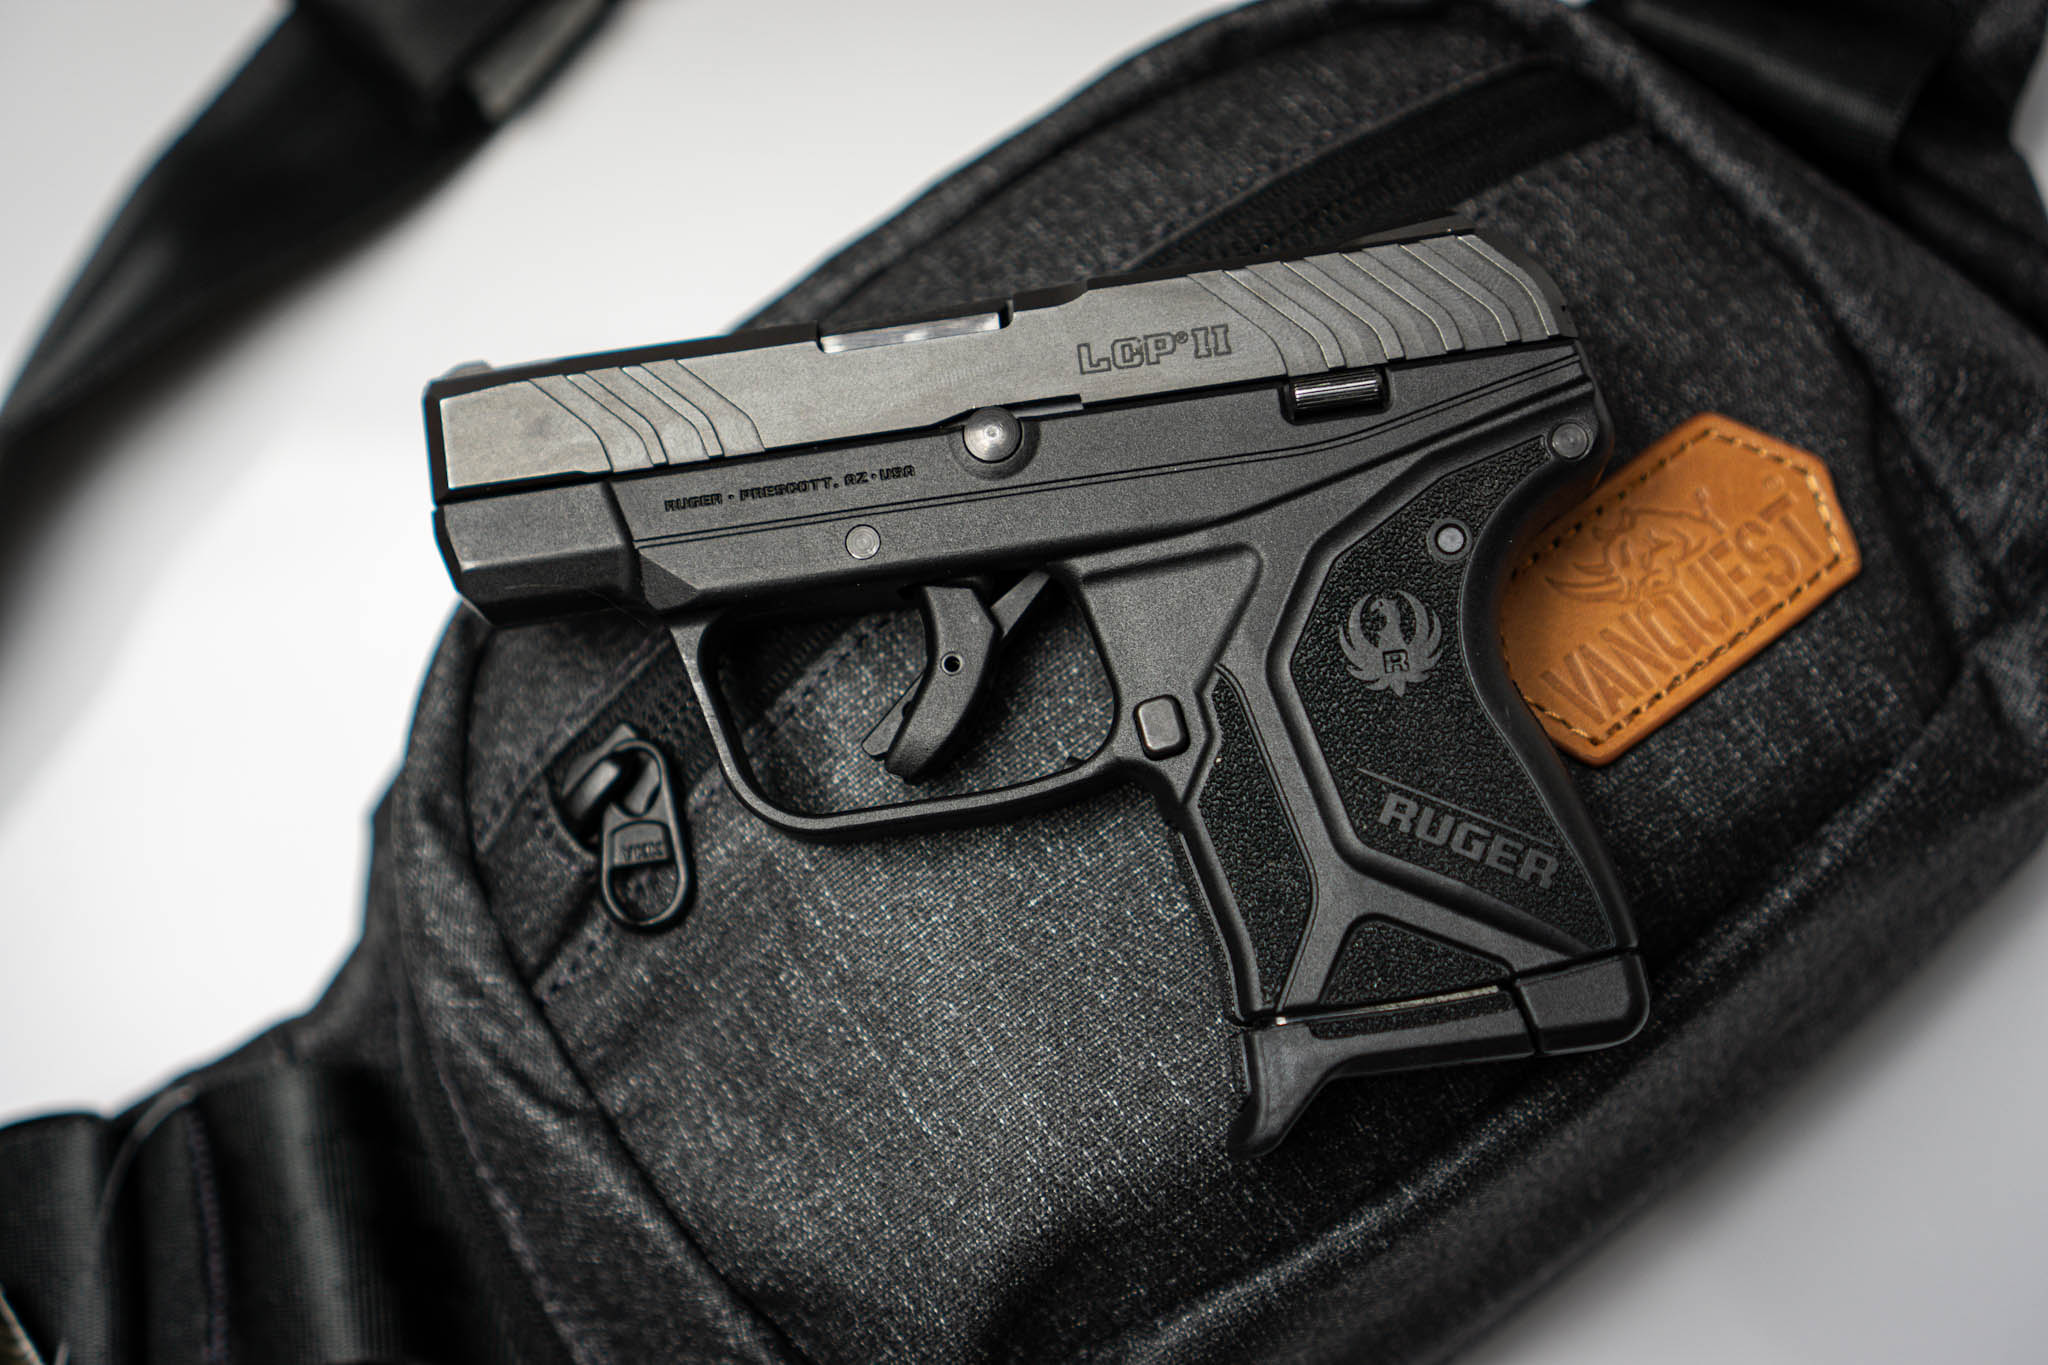 Ruger LCP II pistol displayed on a pack